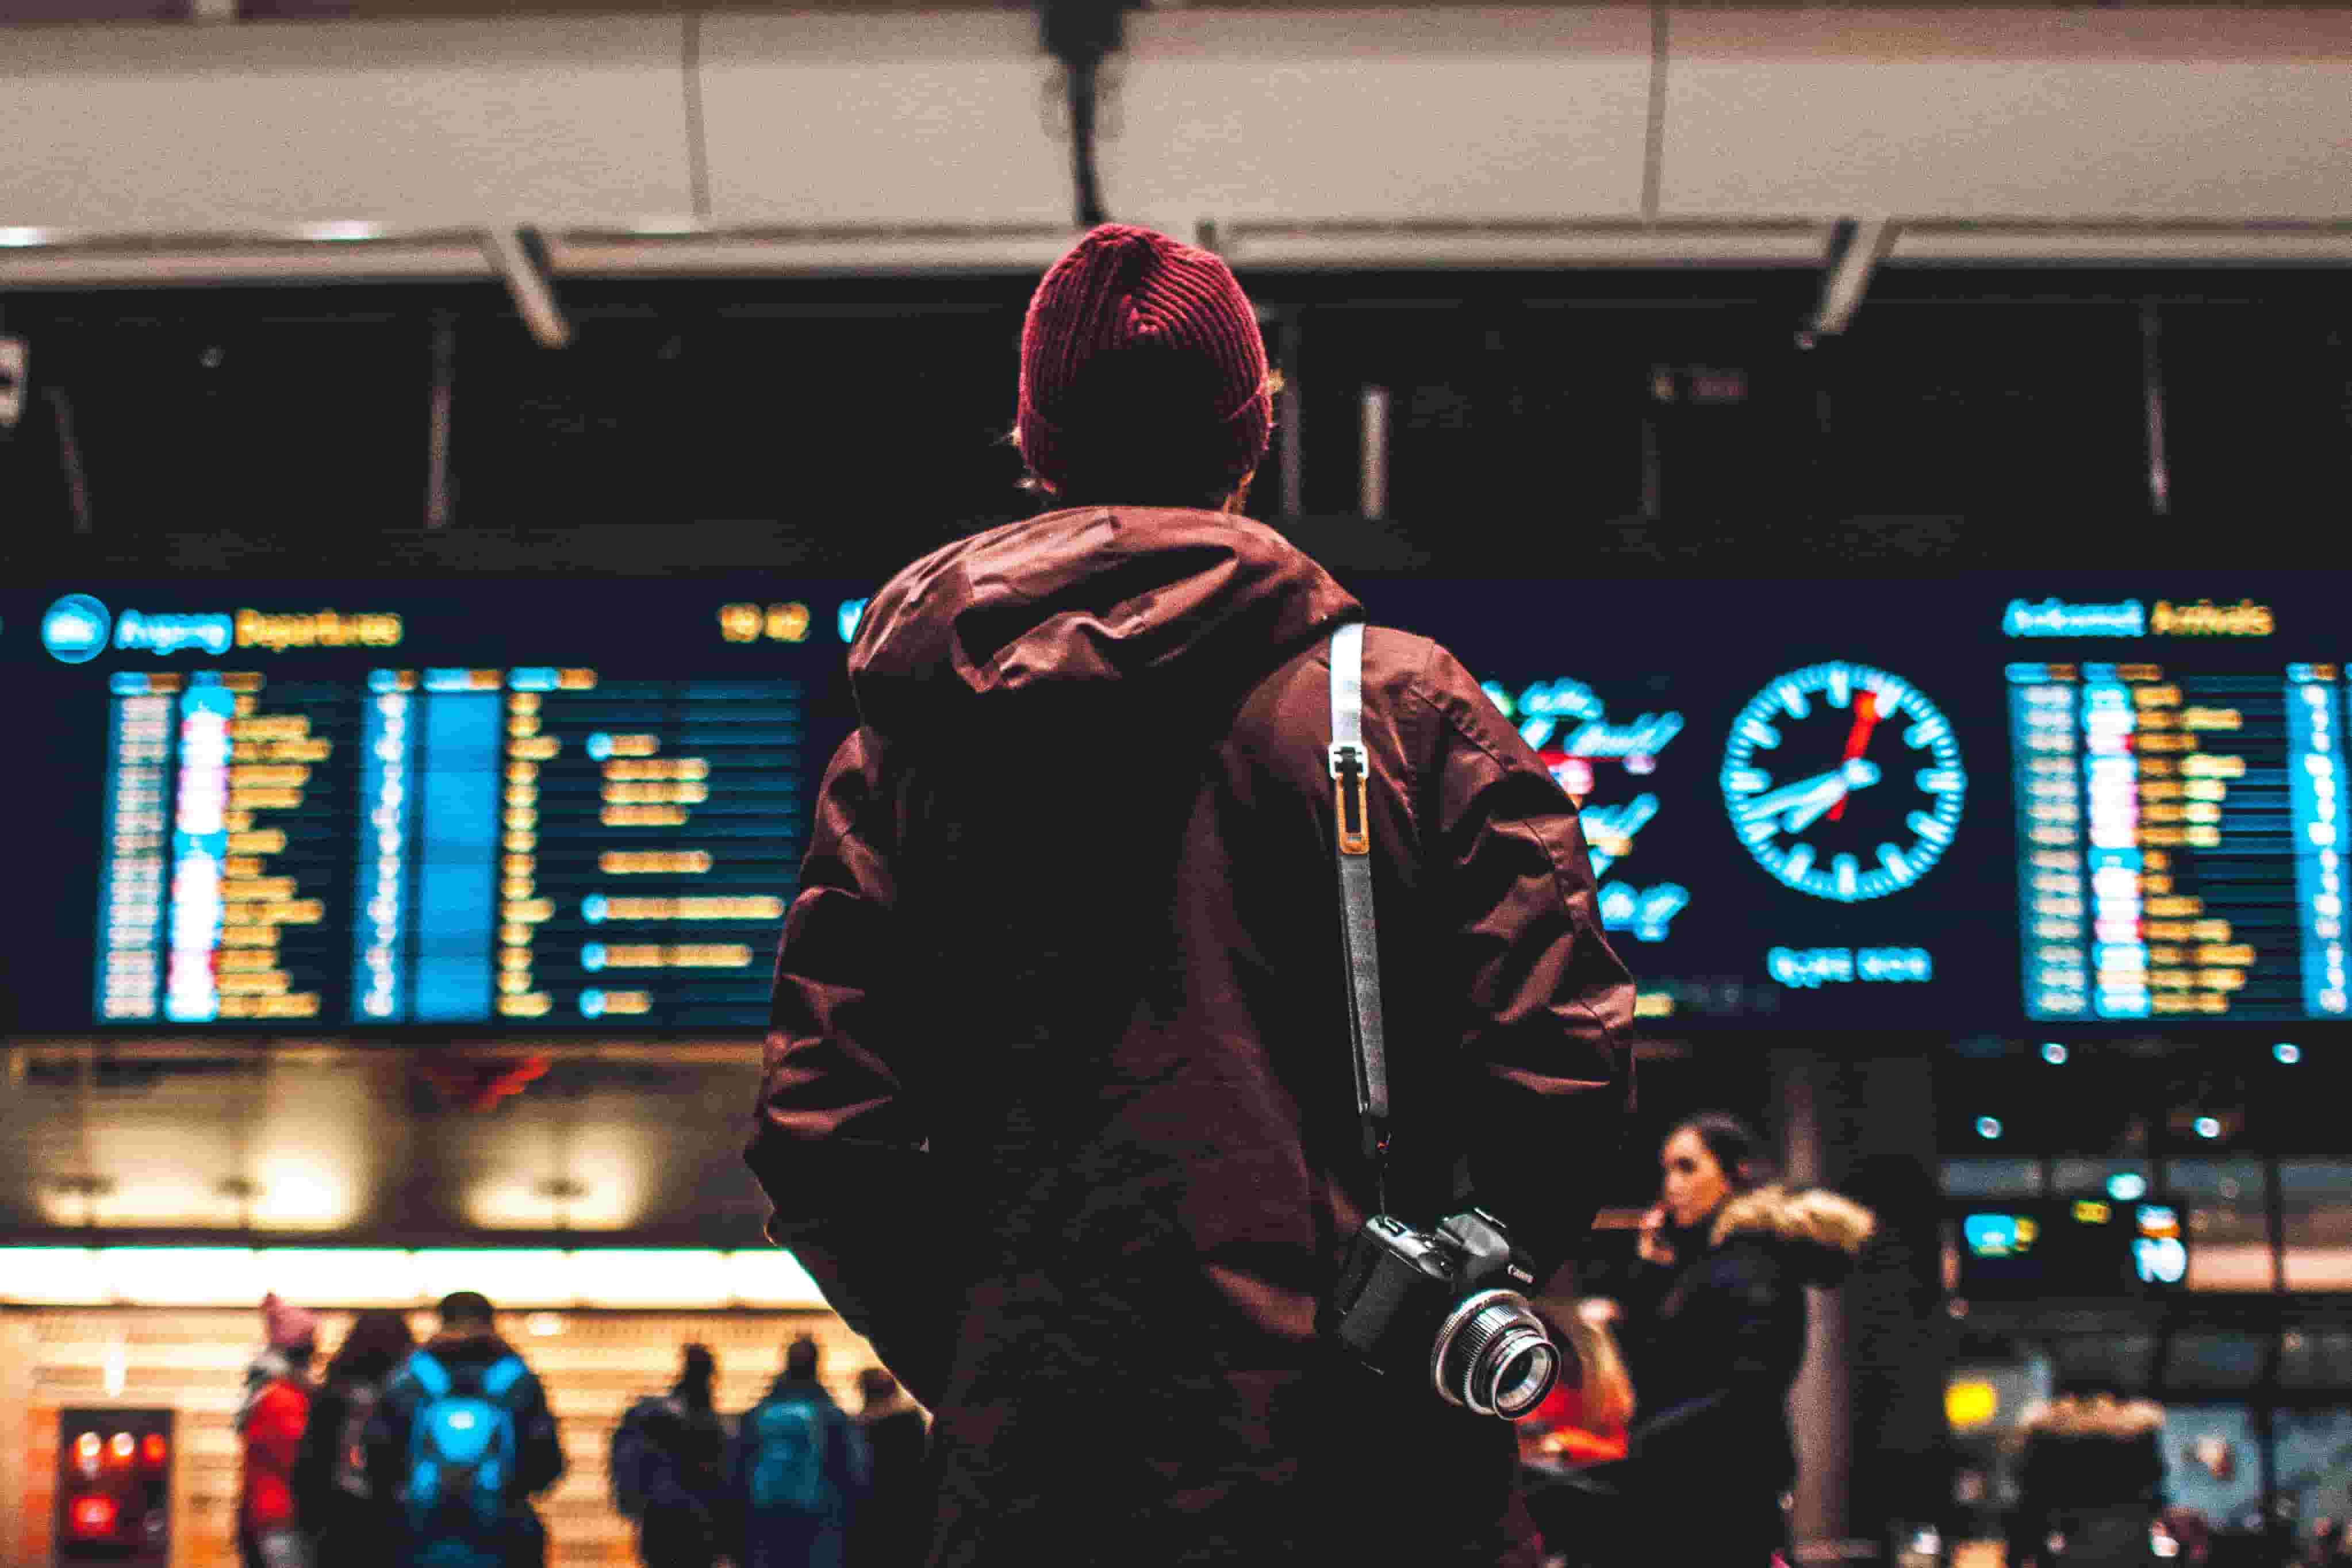 A man waits, looking up at the departure boards at the airport